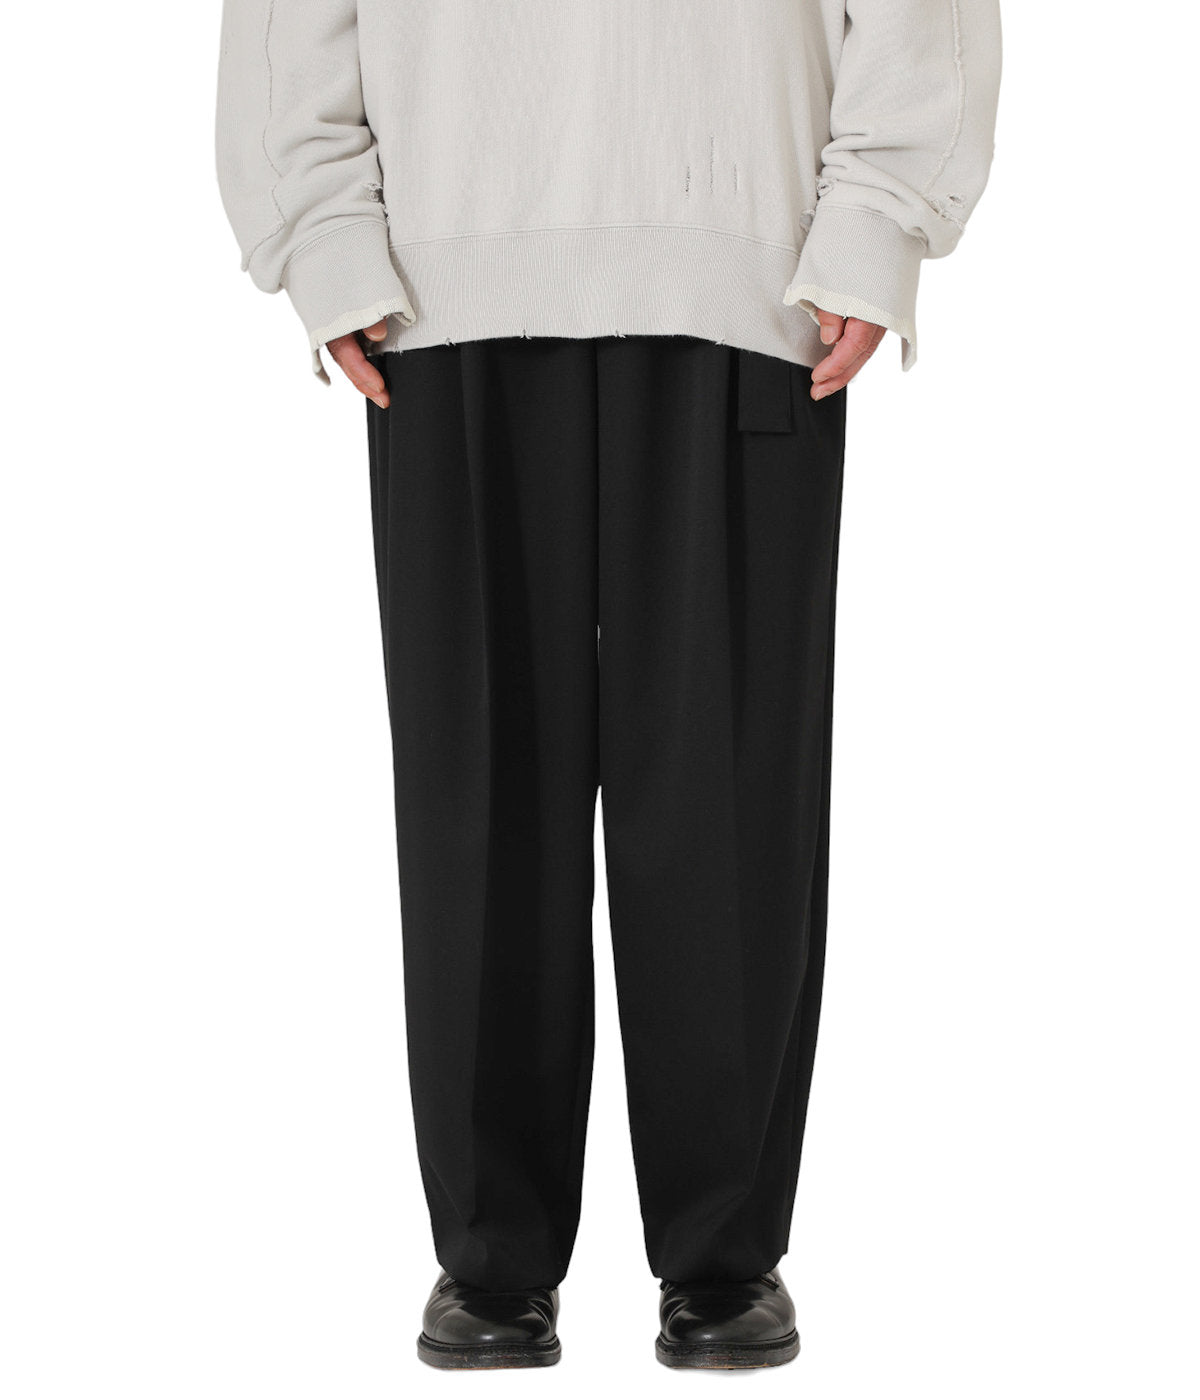 stein extra wide trousers 22399円引き 